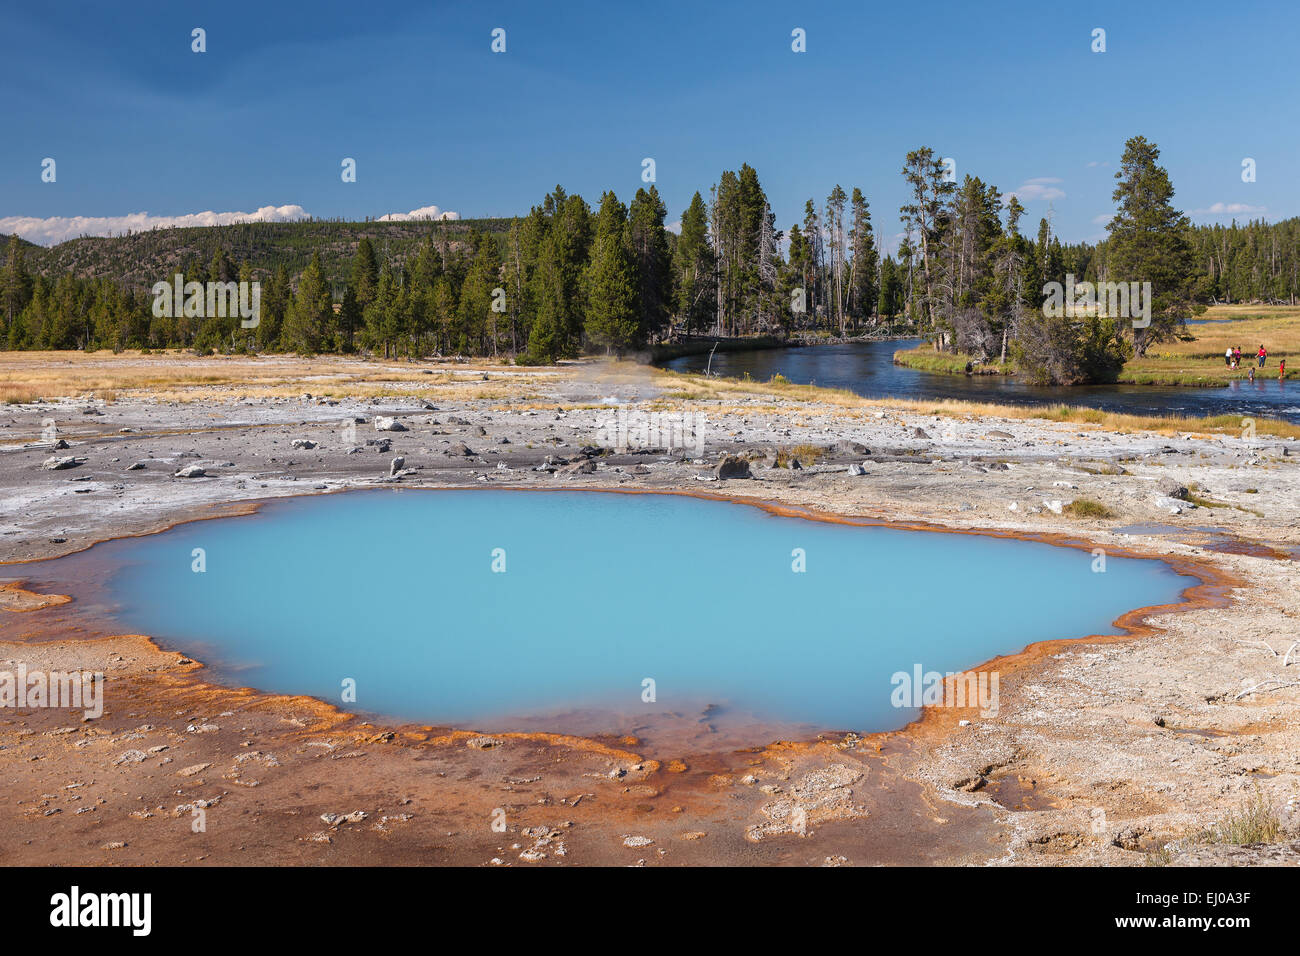 Black Opal Pool, Biscuit Basin, in the Upper Geyser Basin. Yellowstone National Park, Wyoming, United States of America. Stock Photo